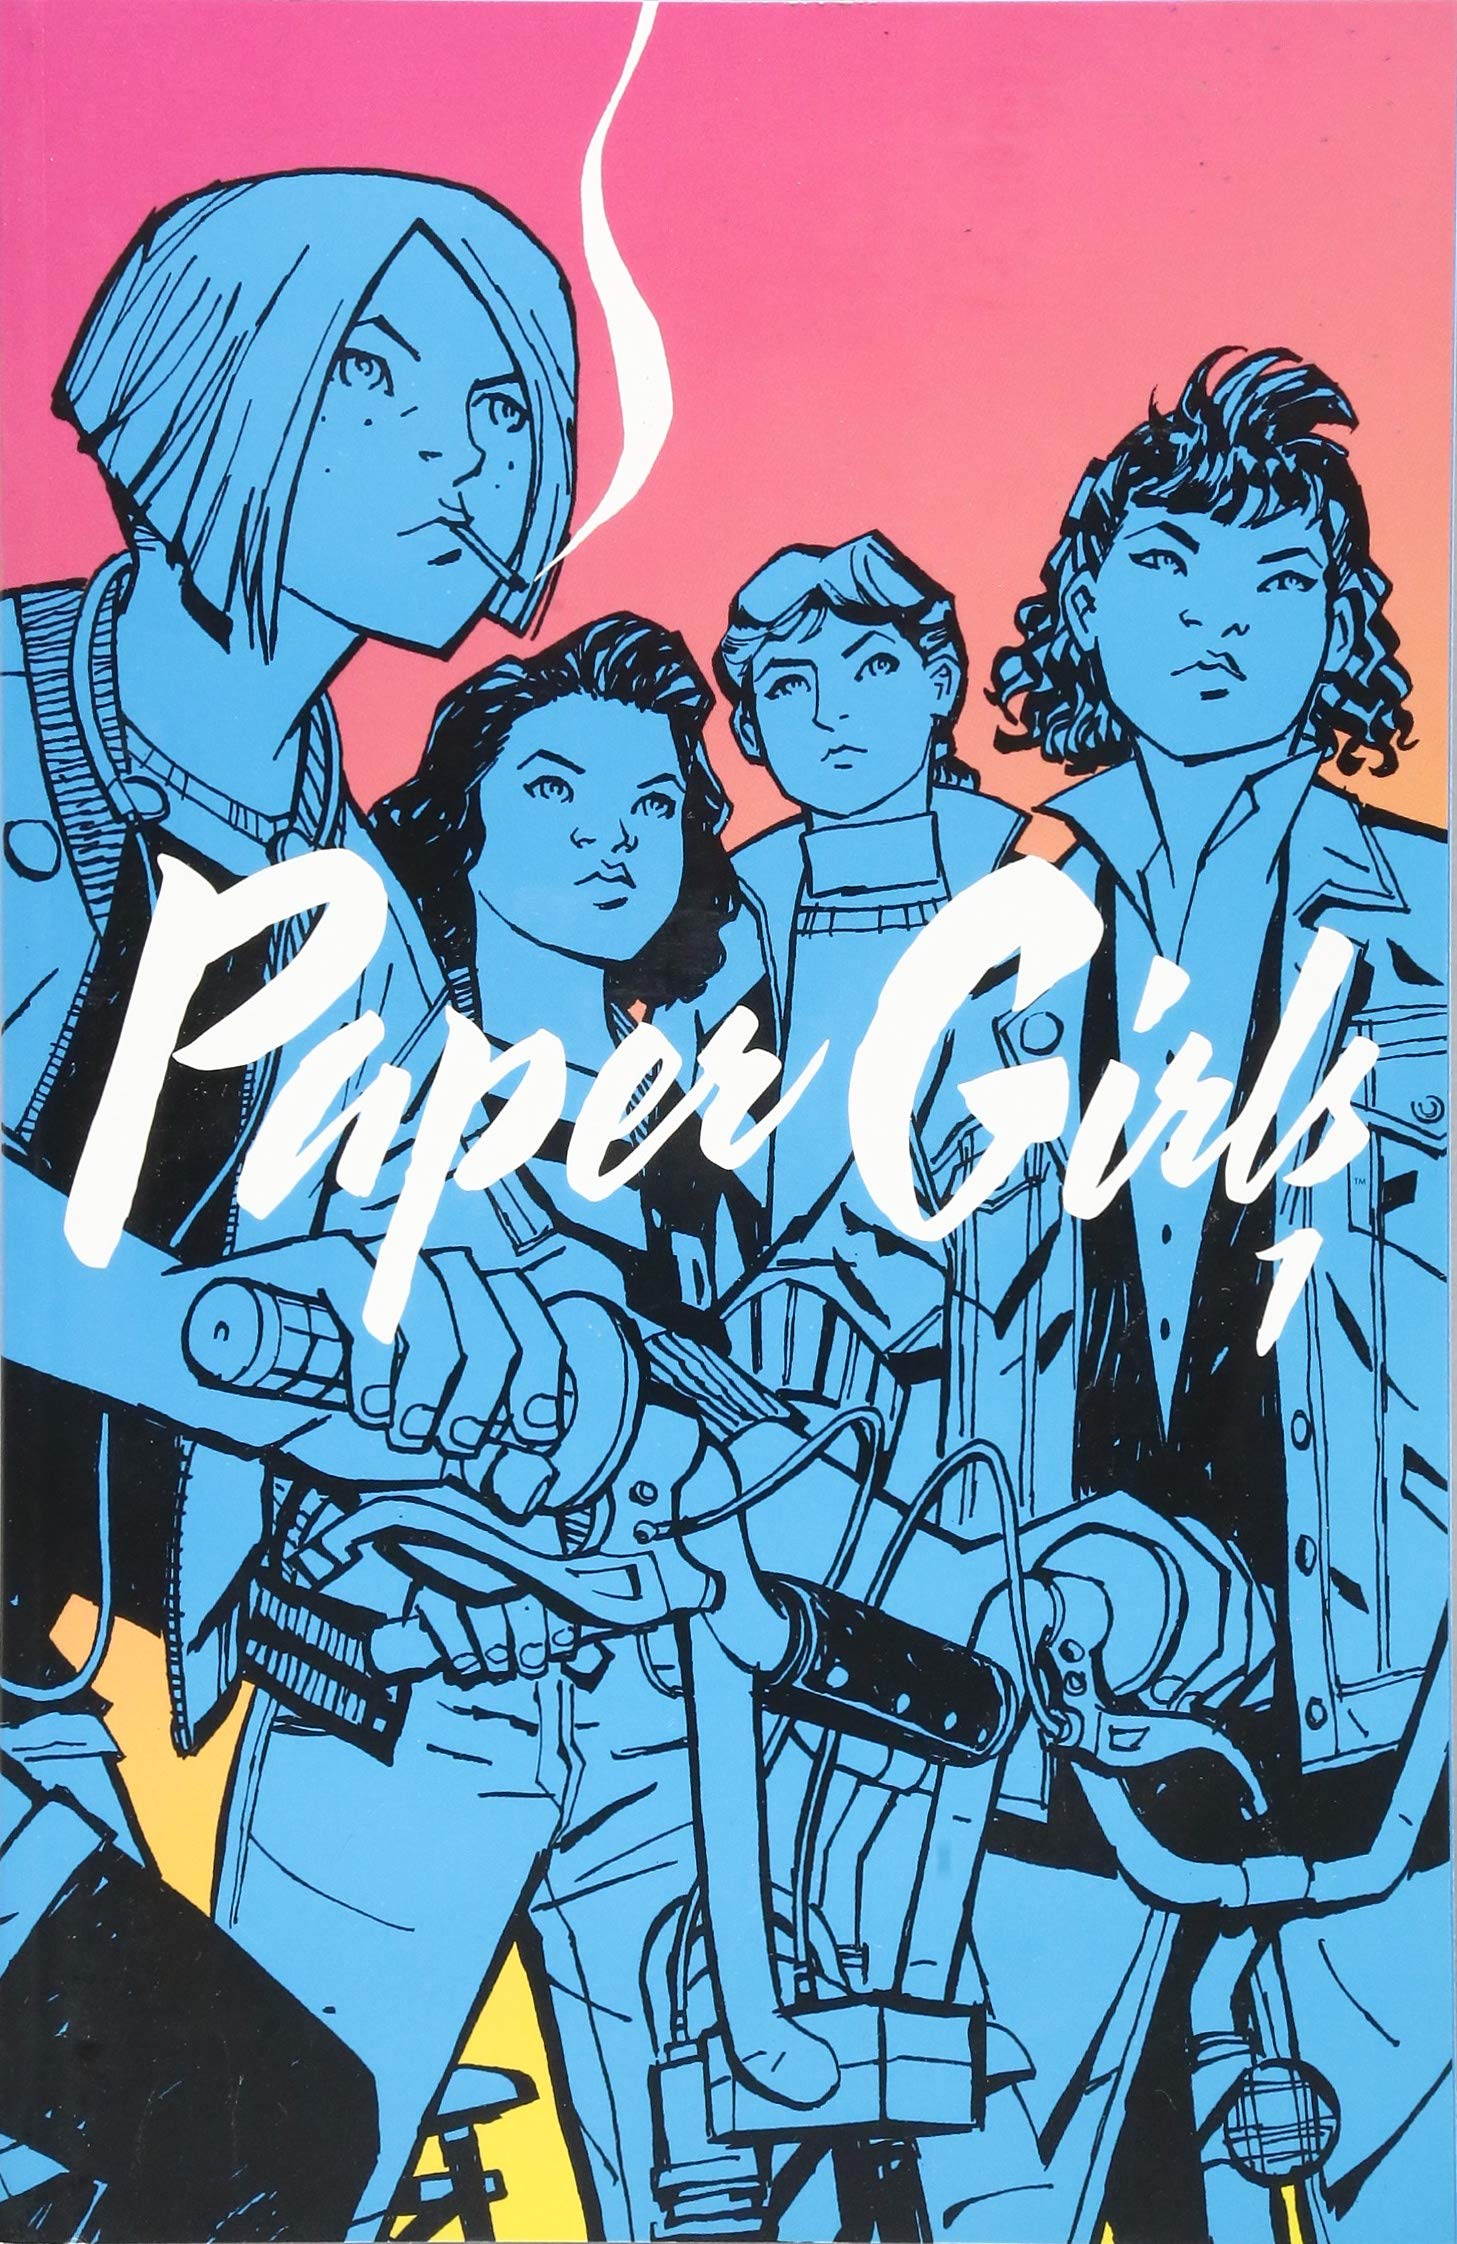 The cover of Paper Girls volume 1 features four girls colored in blue on a pink background.